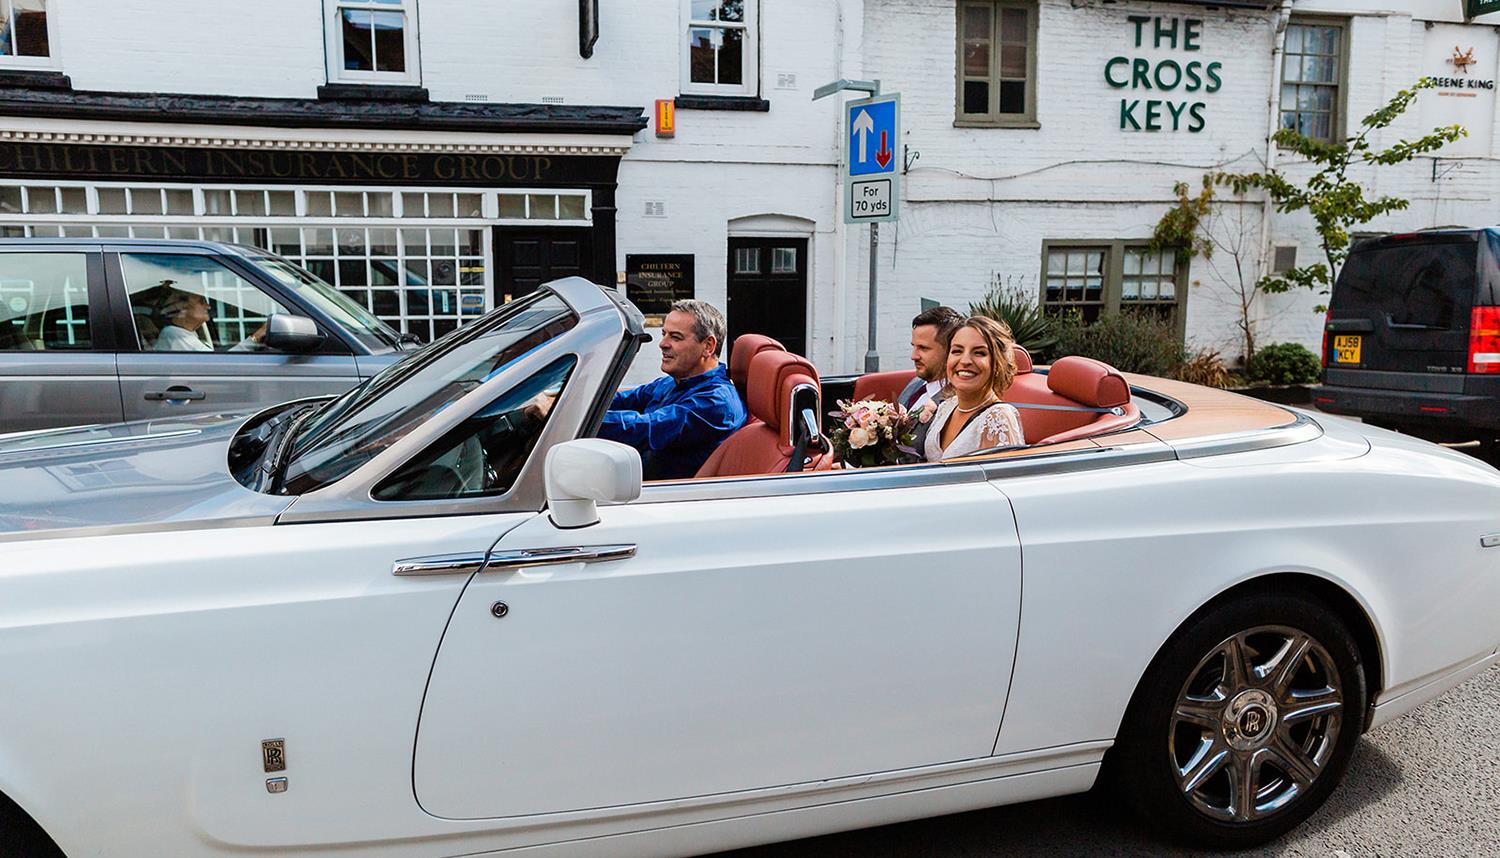 Wedding car with bride and groom sitting on rear seat. Photo Credit: Philip Quinnell